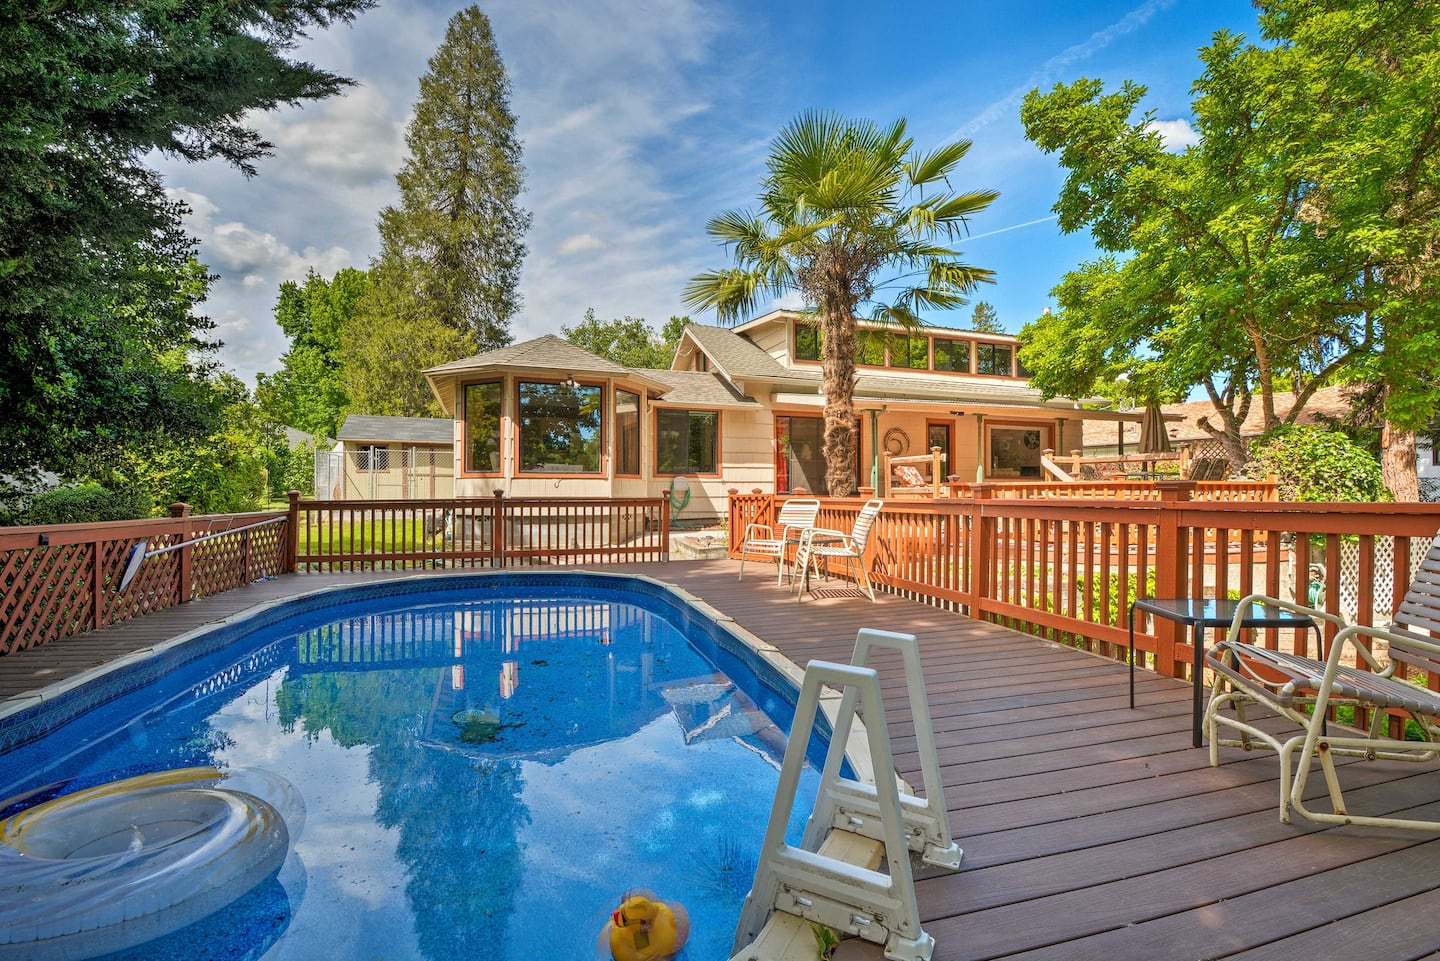 10 Incredible Airbnb Rentals with Pools to Kick Off Your Summer